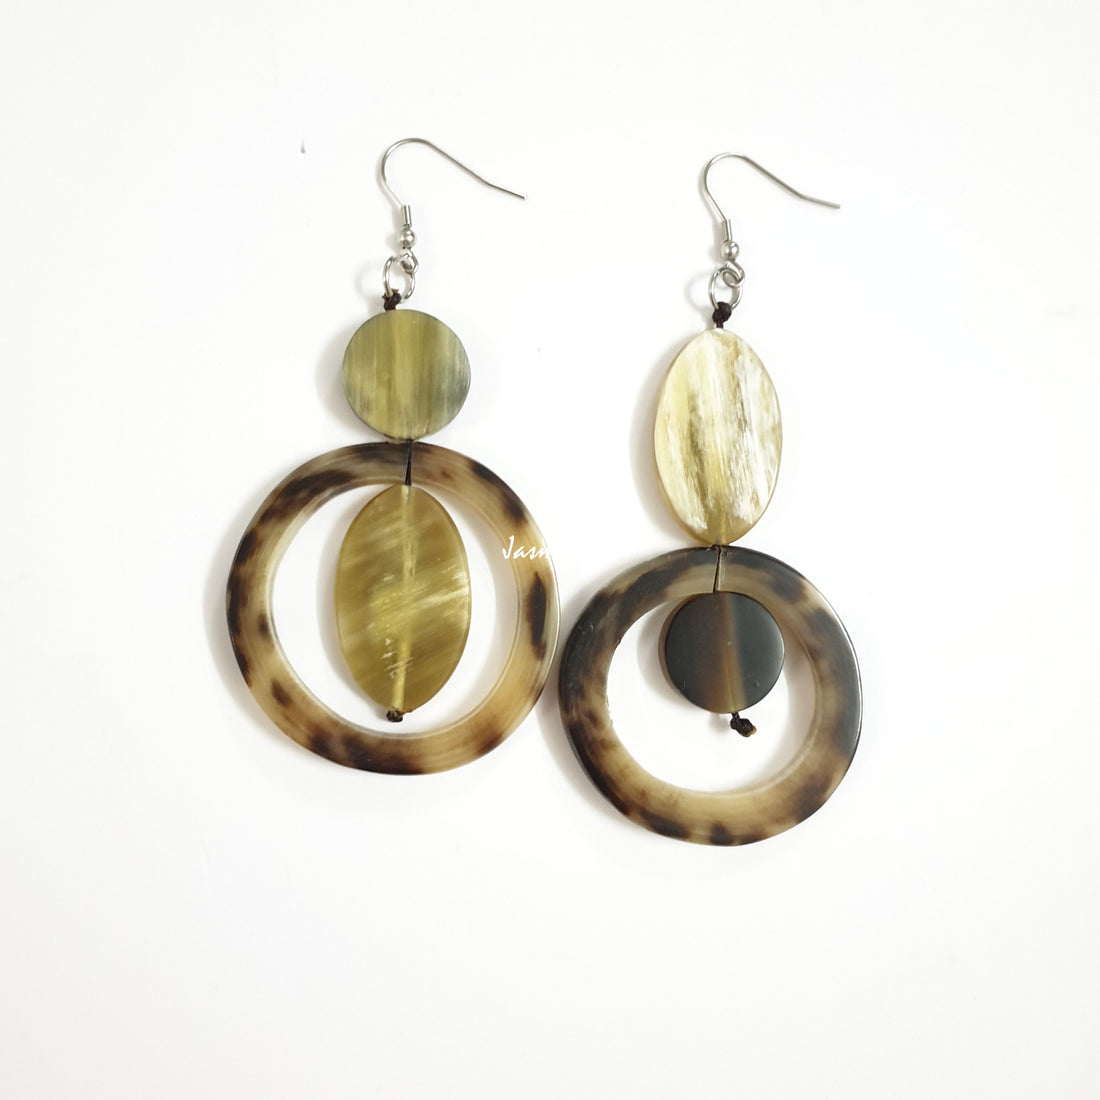 Handmade circular dangle earrings are made by natural buffalo horn featured green tea and brown color in the natural light